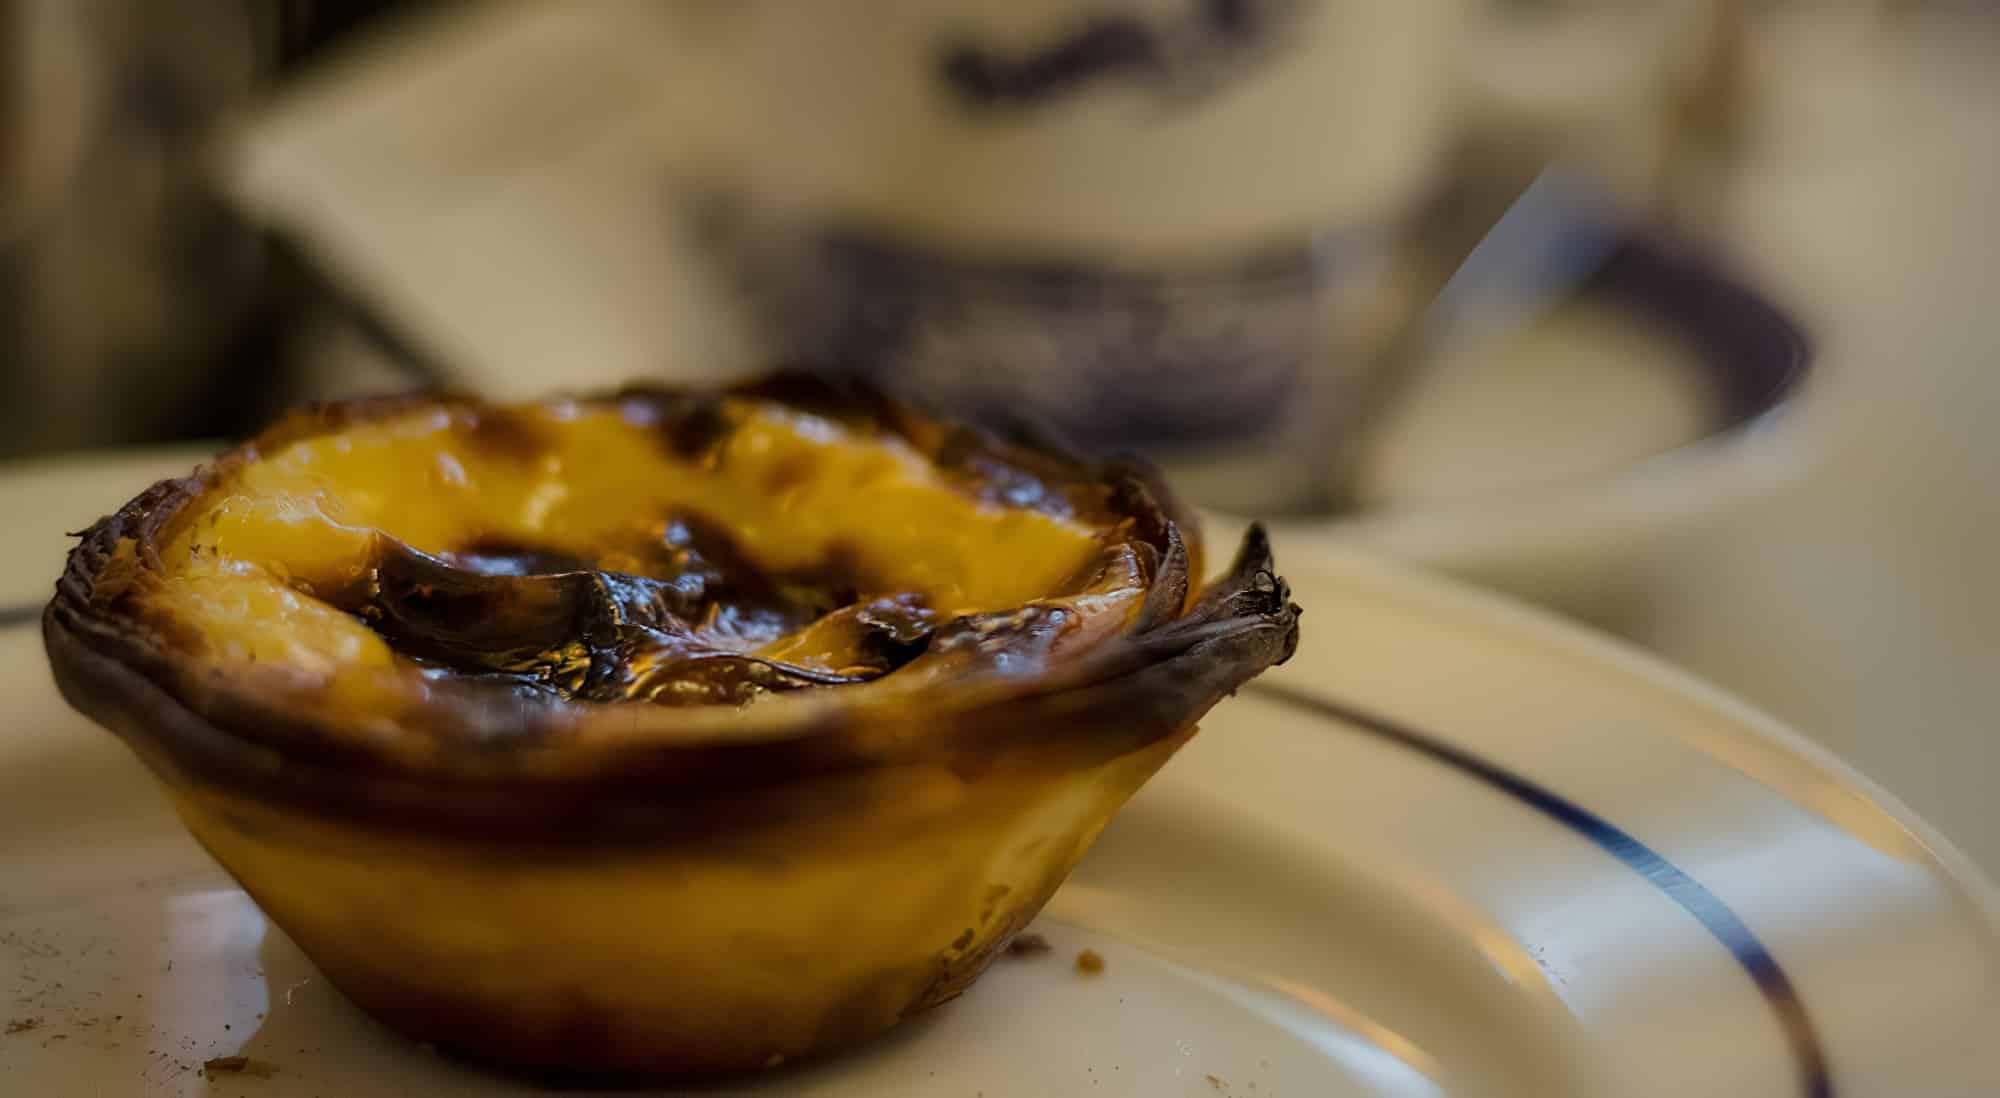 Discover Gastronomic specialties in Lisbon: what to eat in Lisbon?